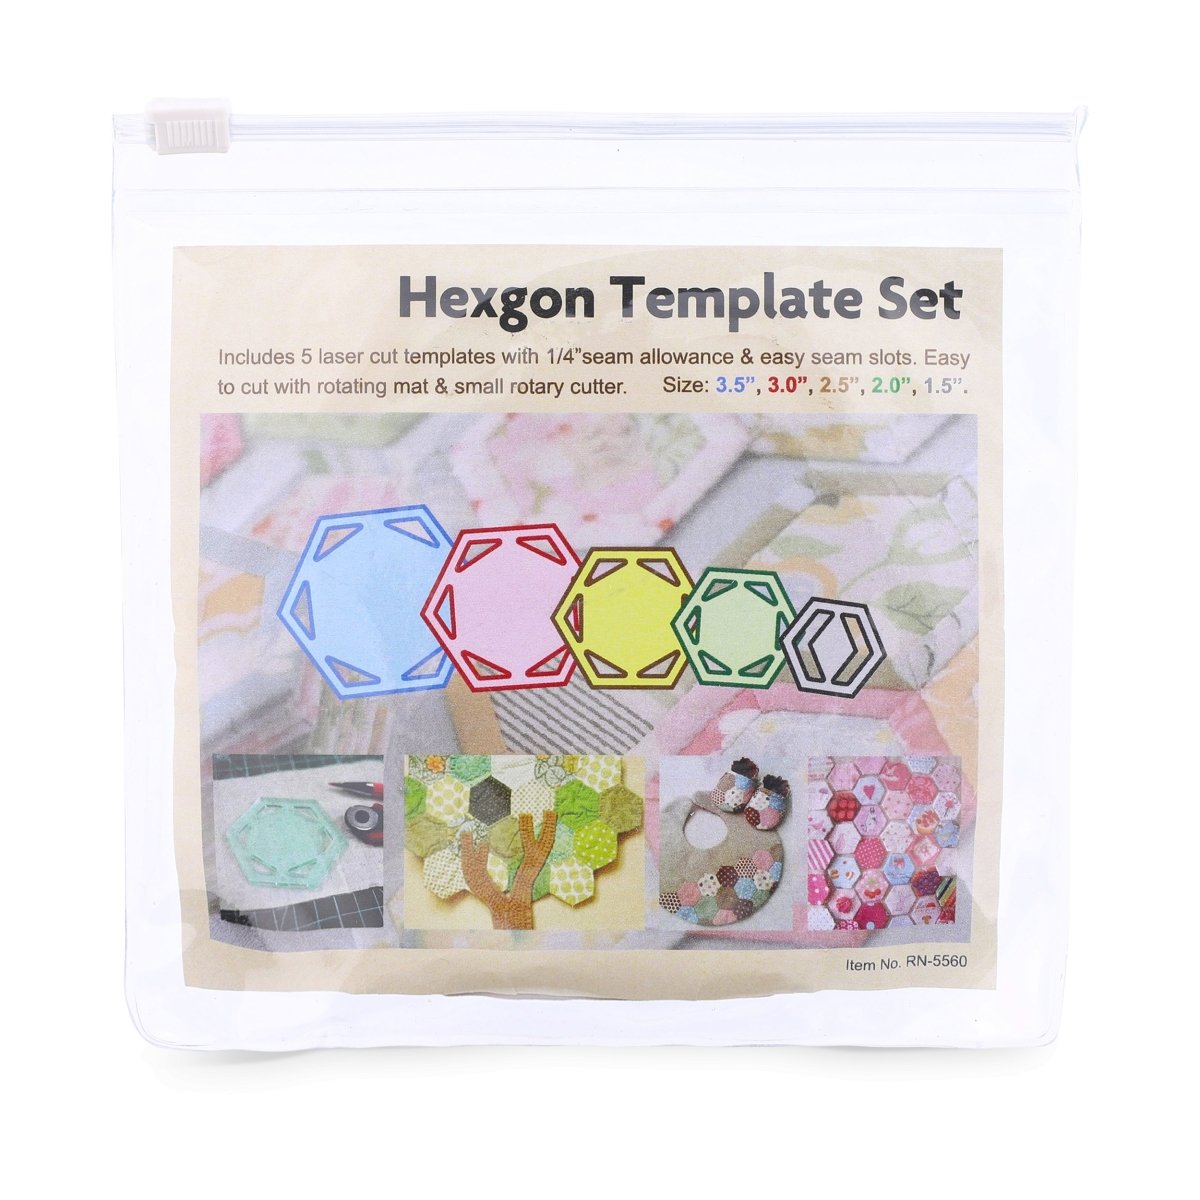 5pc Hexagon Template set in package